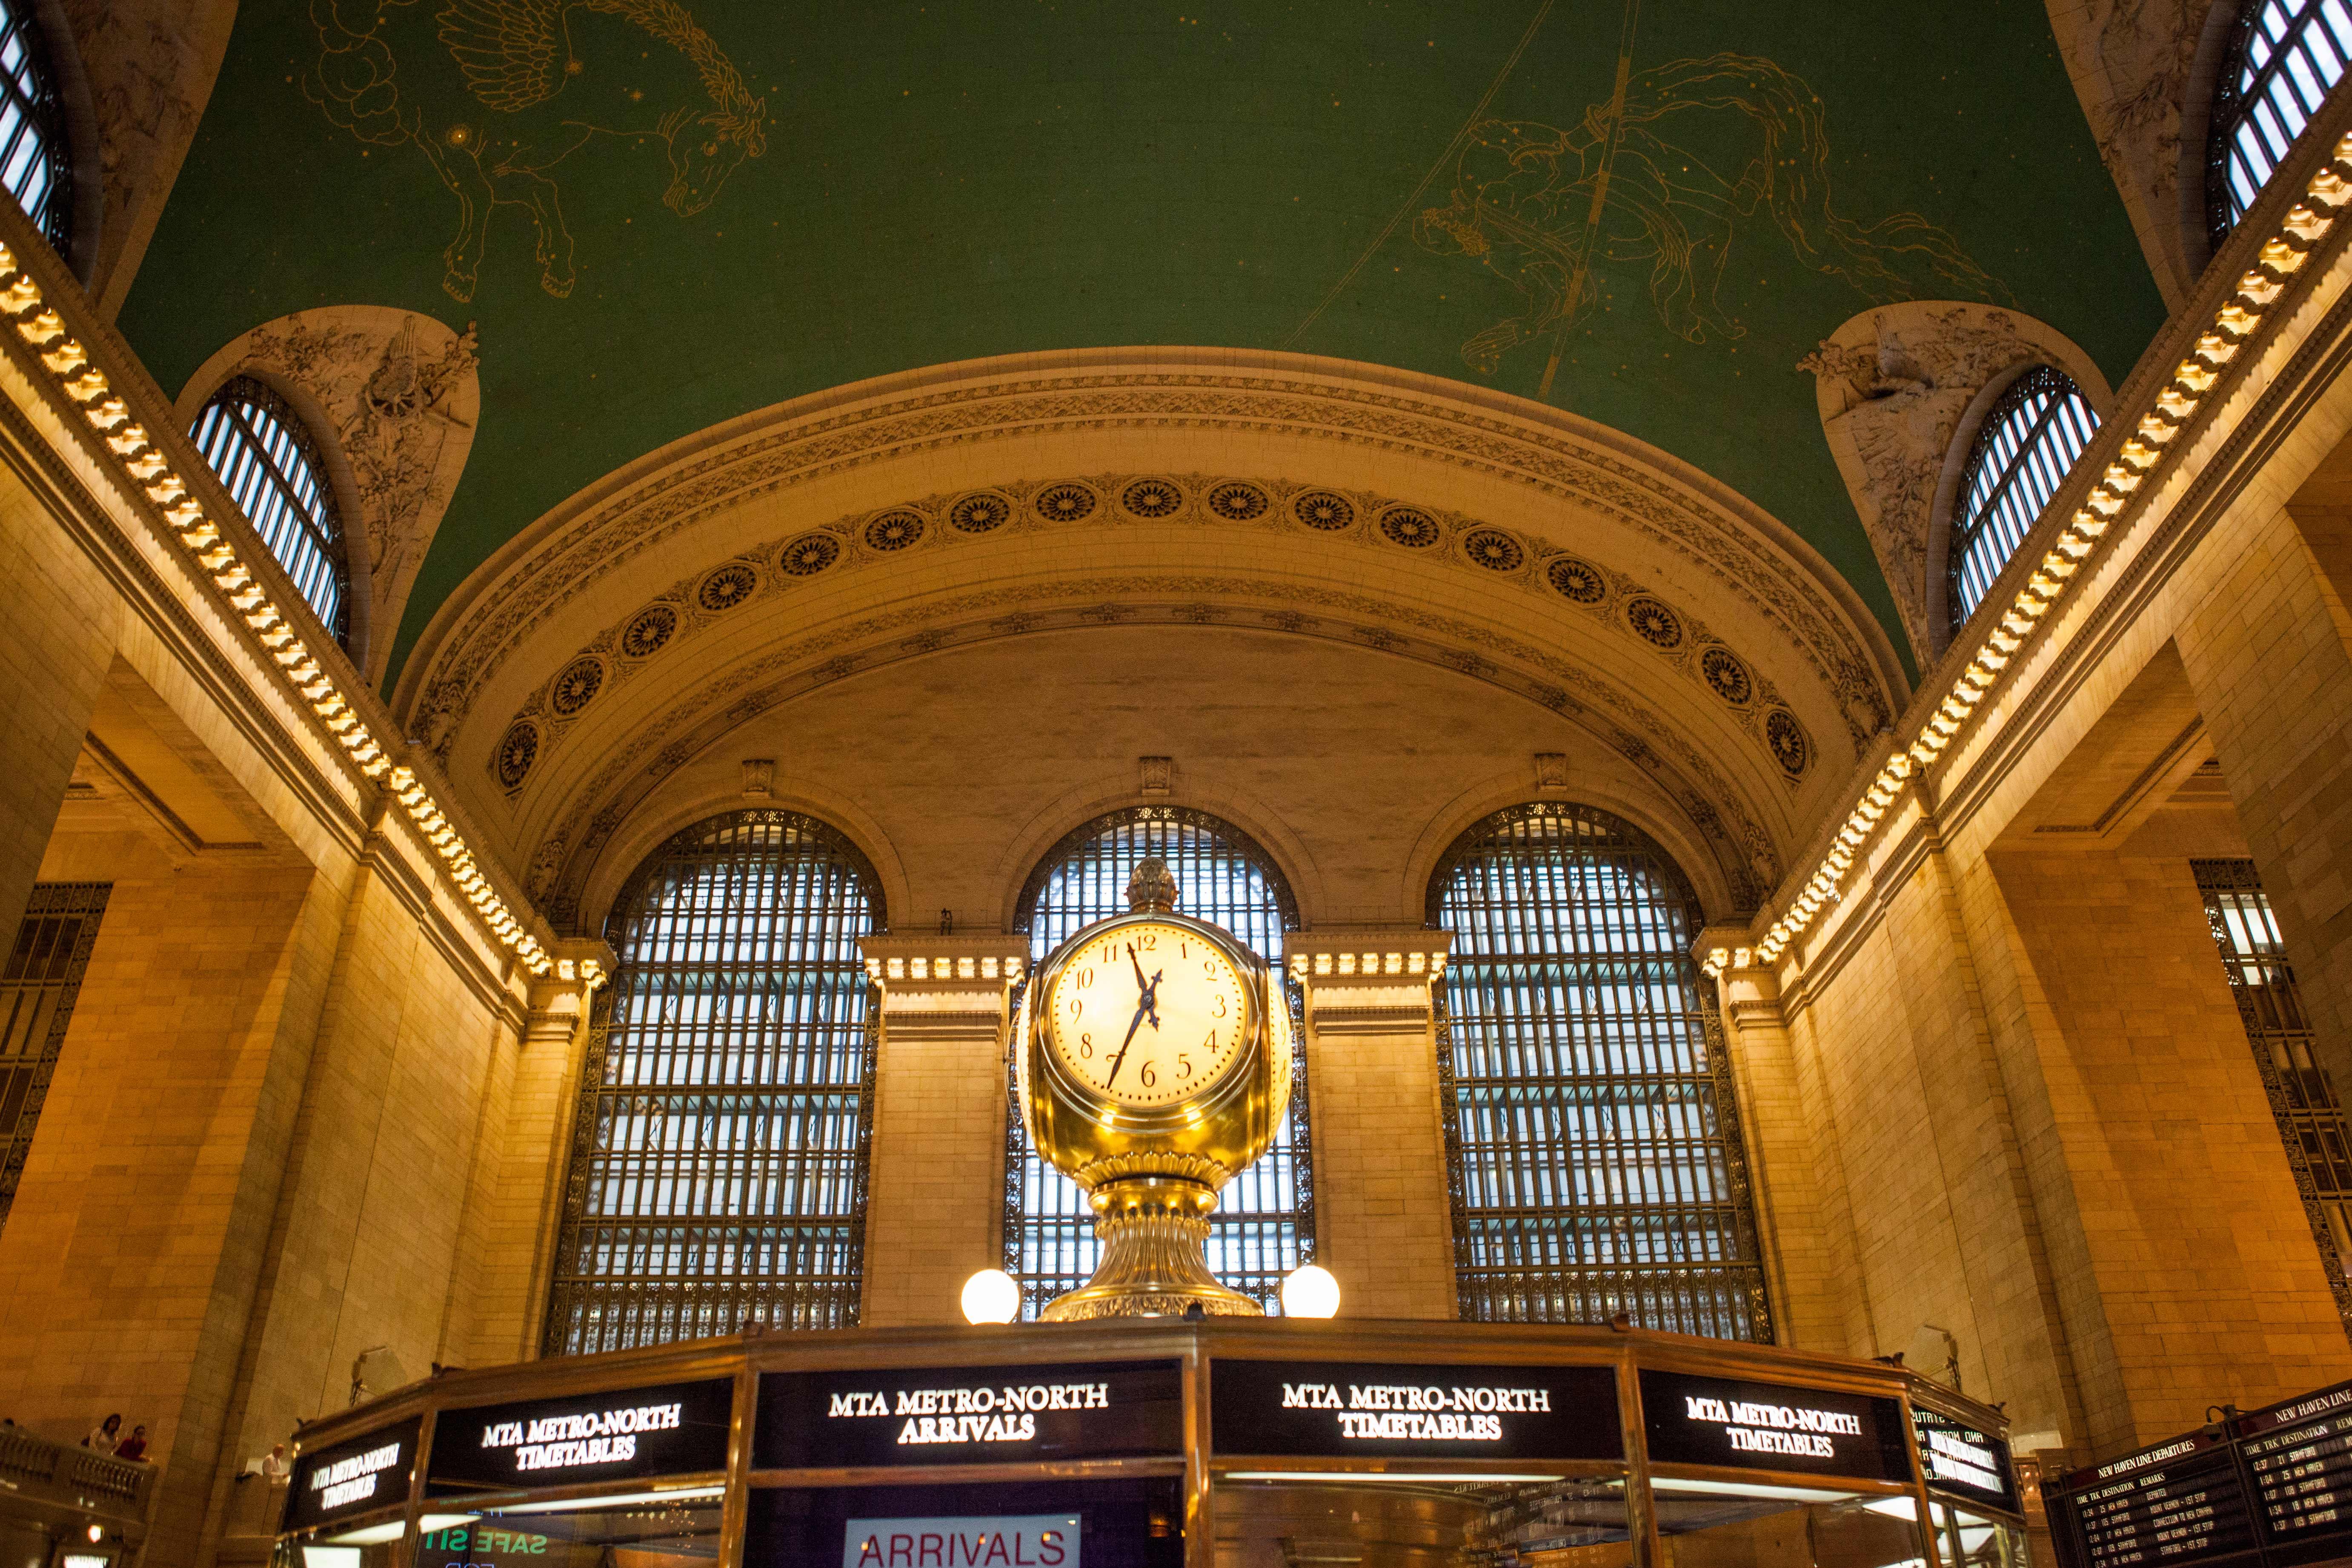 Grand Central Station, History, Clock, & Ceiling